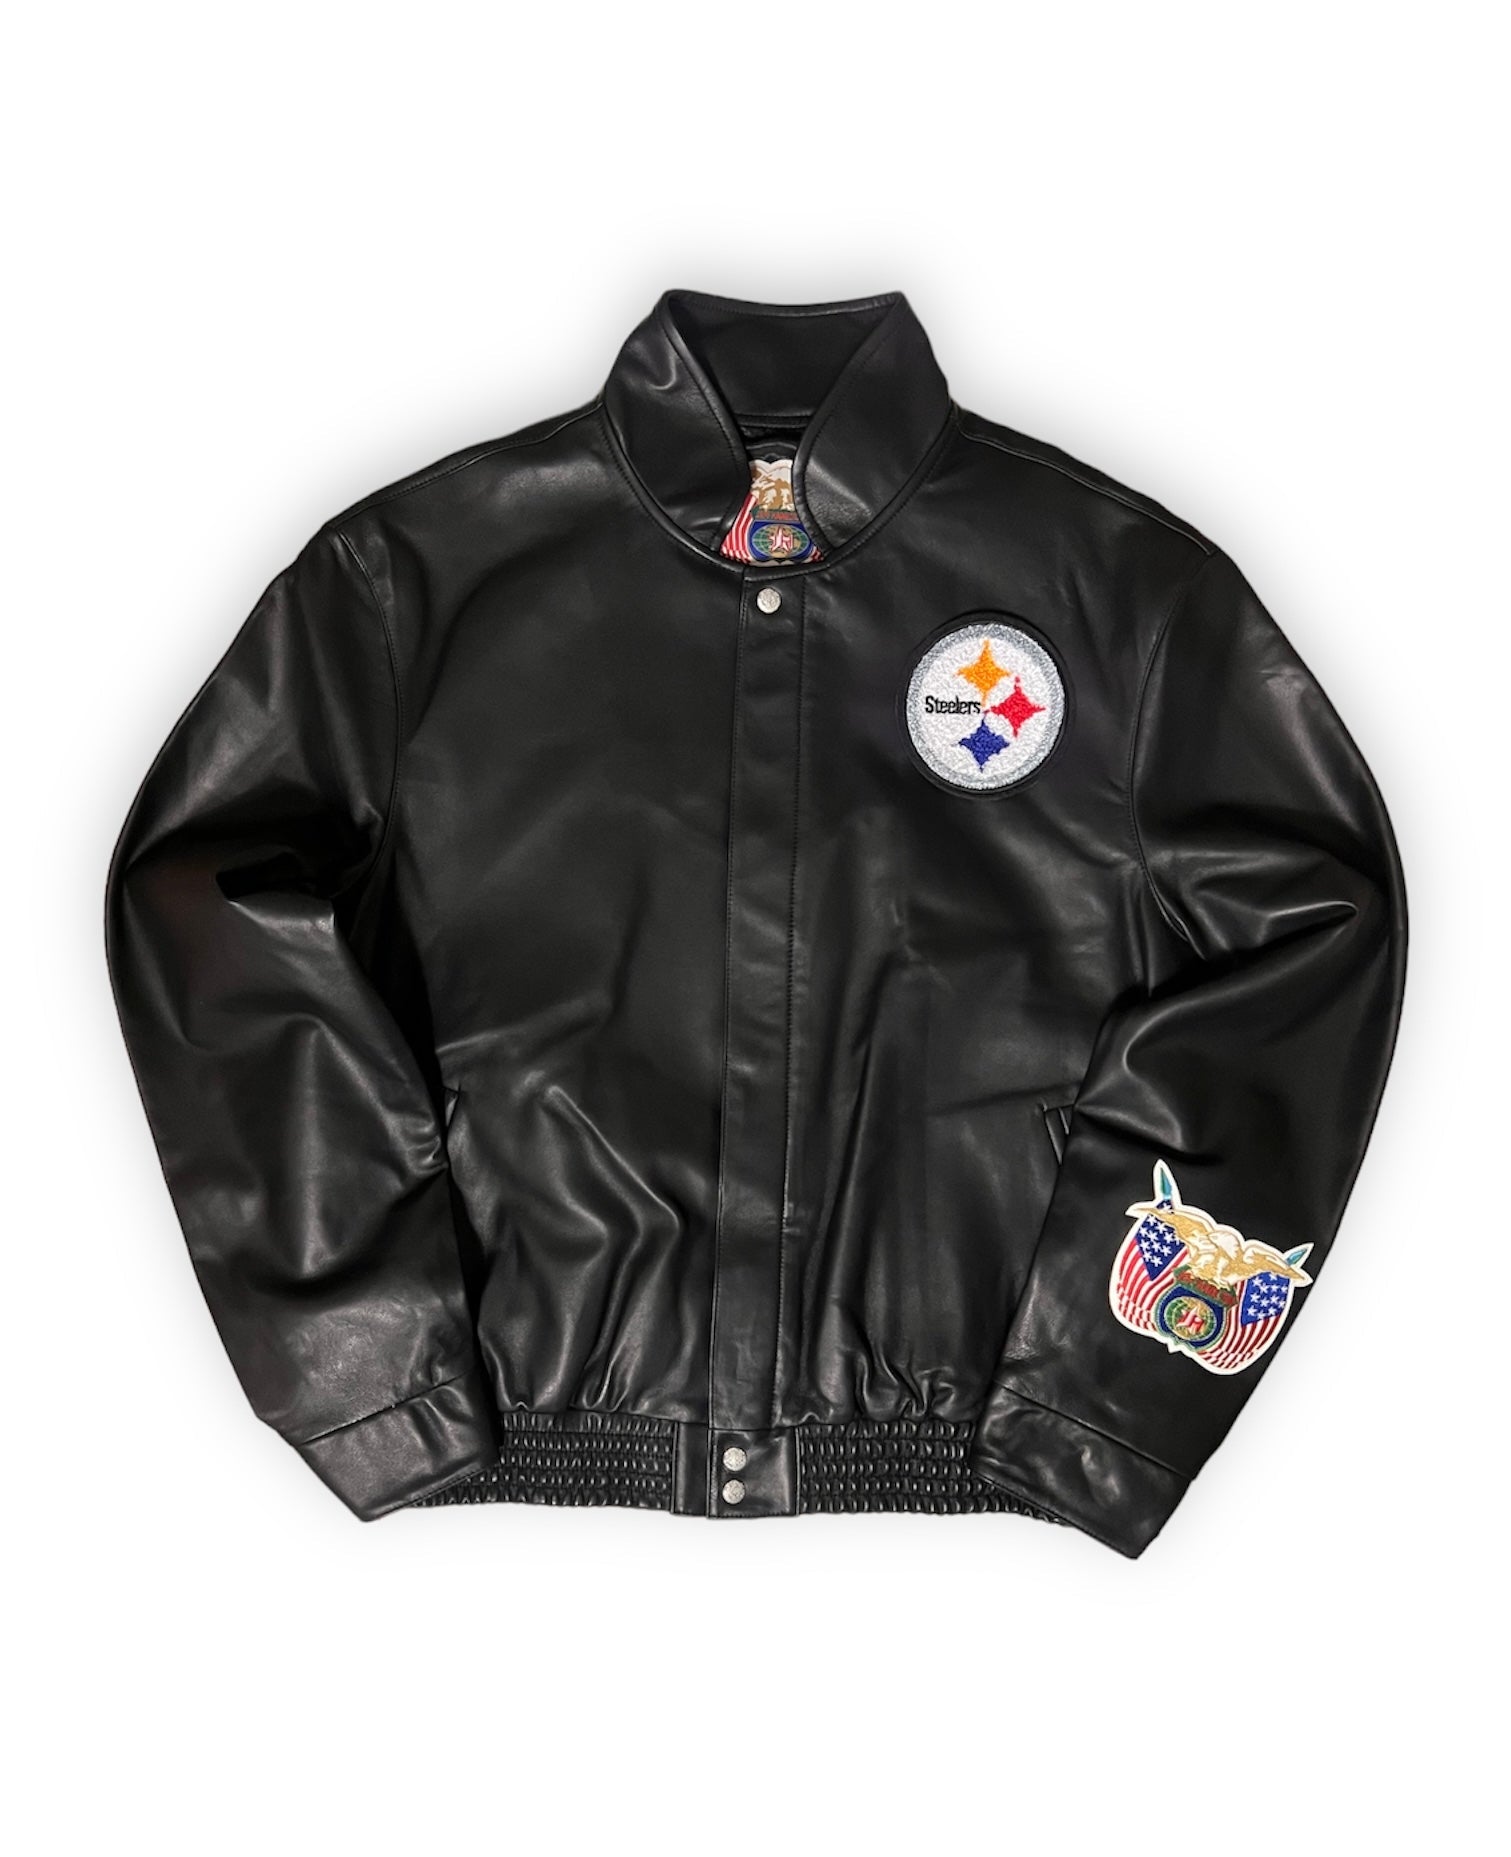 PITTSBURGH STEELERS FULL LEATHER JACKET